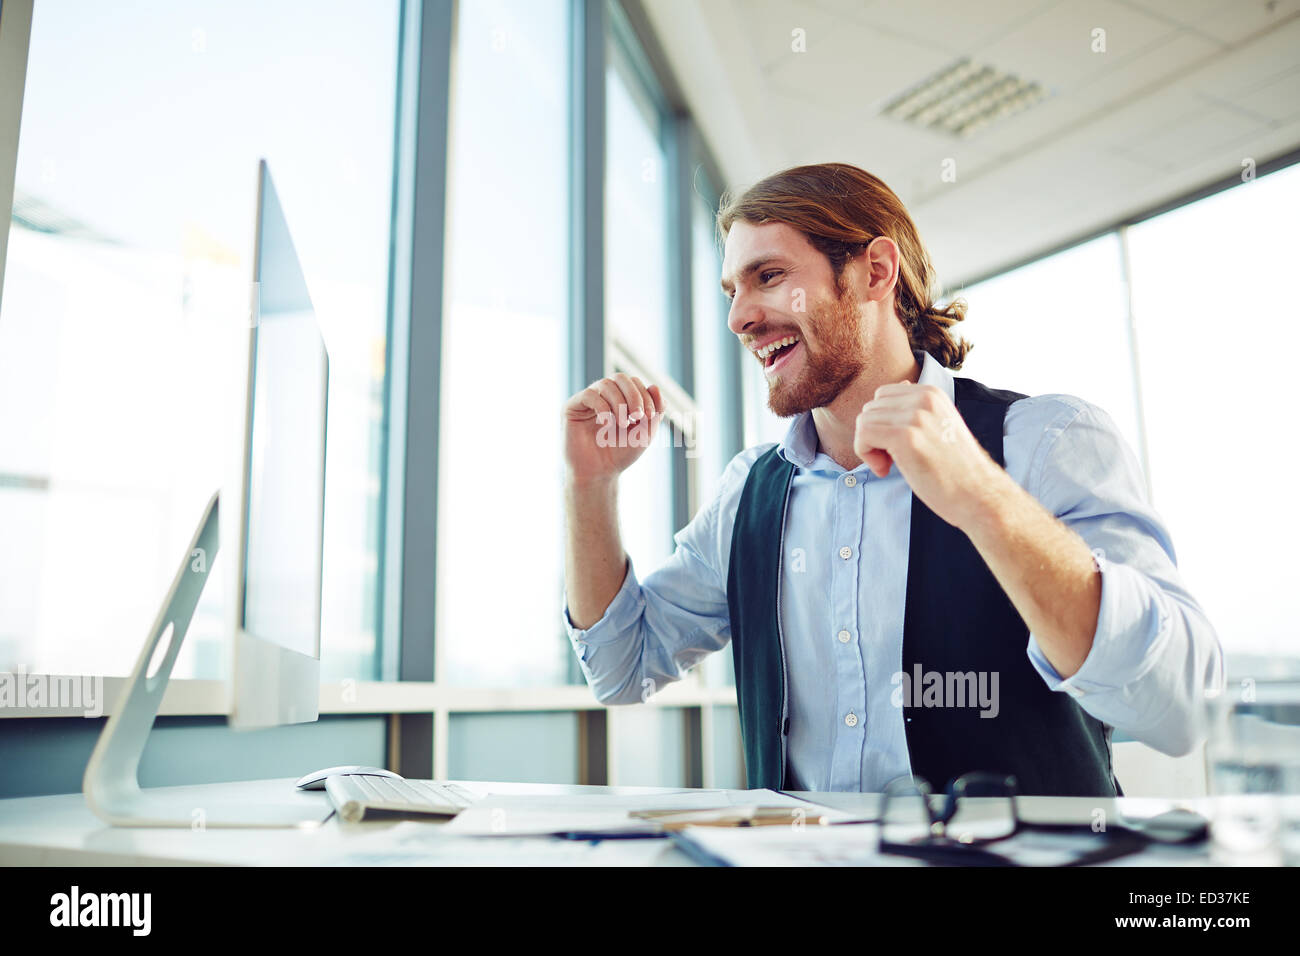 Happy young employee expressing gladness while looking at monitor Stock Photo